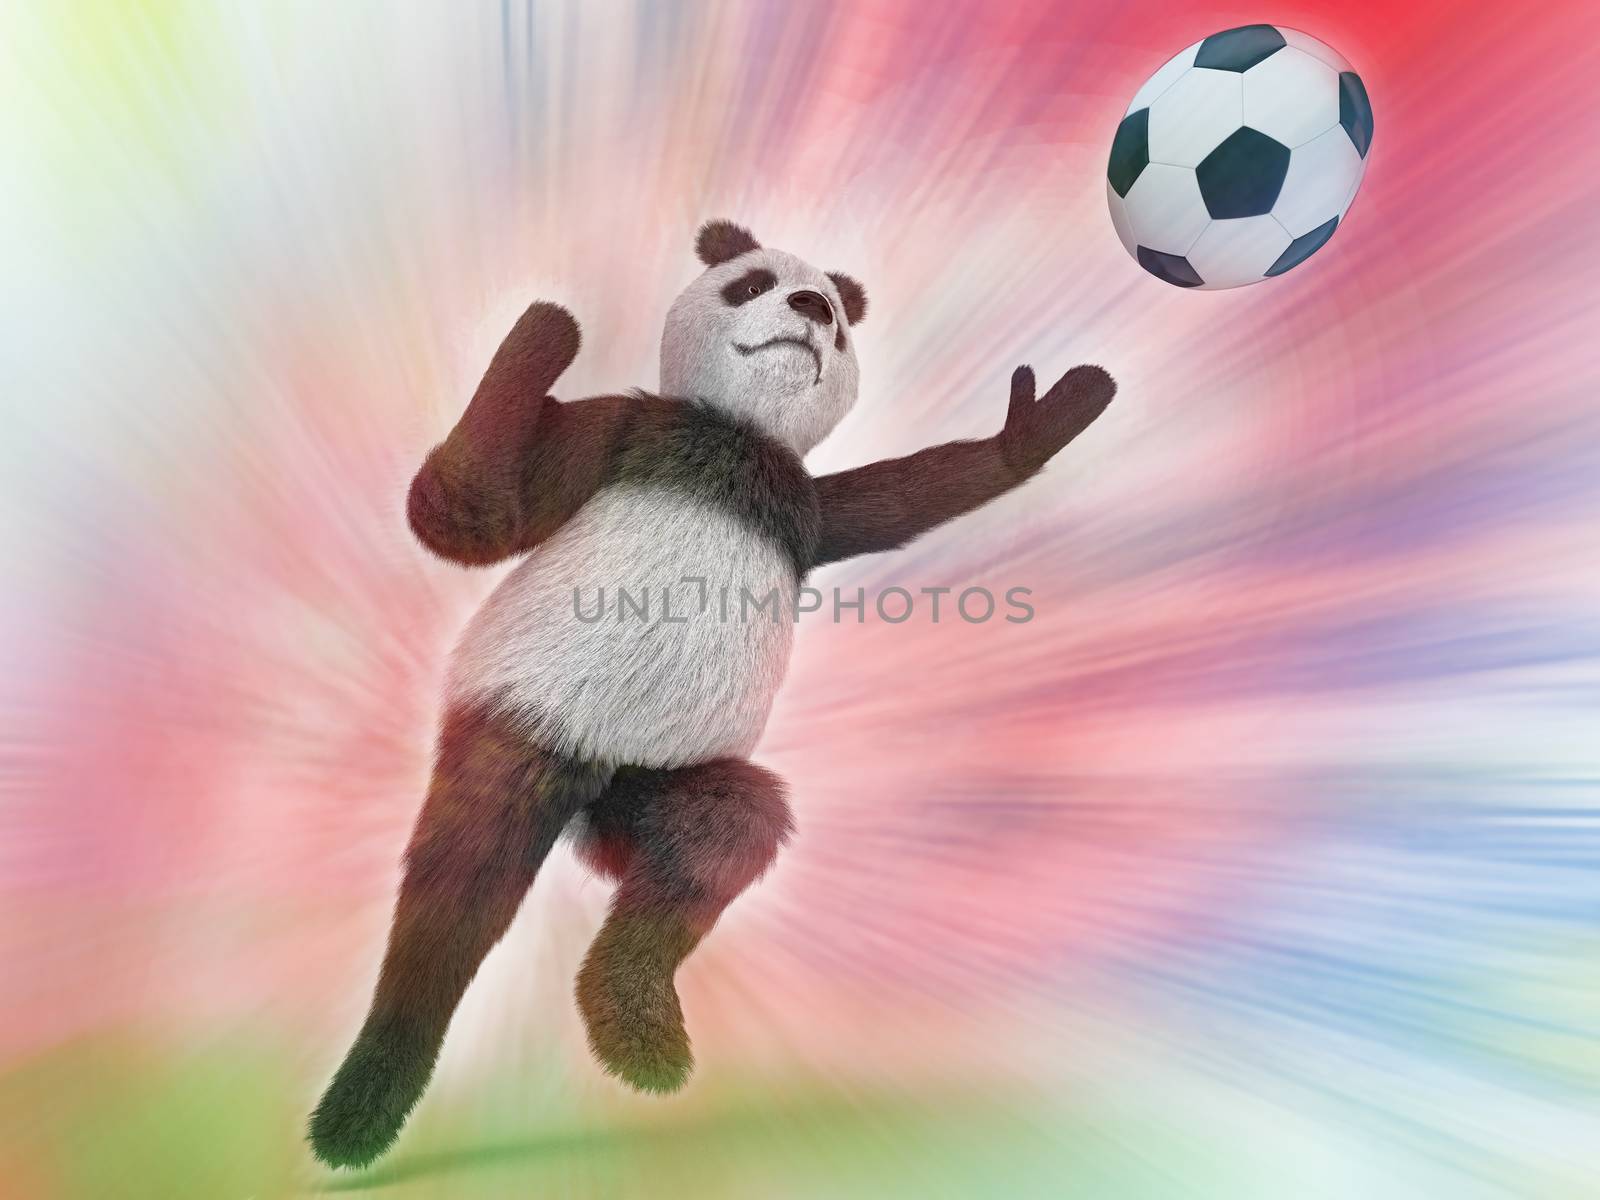 wild panda goalie in the rapid jump trying to catch a soccer ball on a colorful watercolor background blurred. upright character Bear goalkeeper catches pitch.